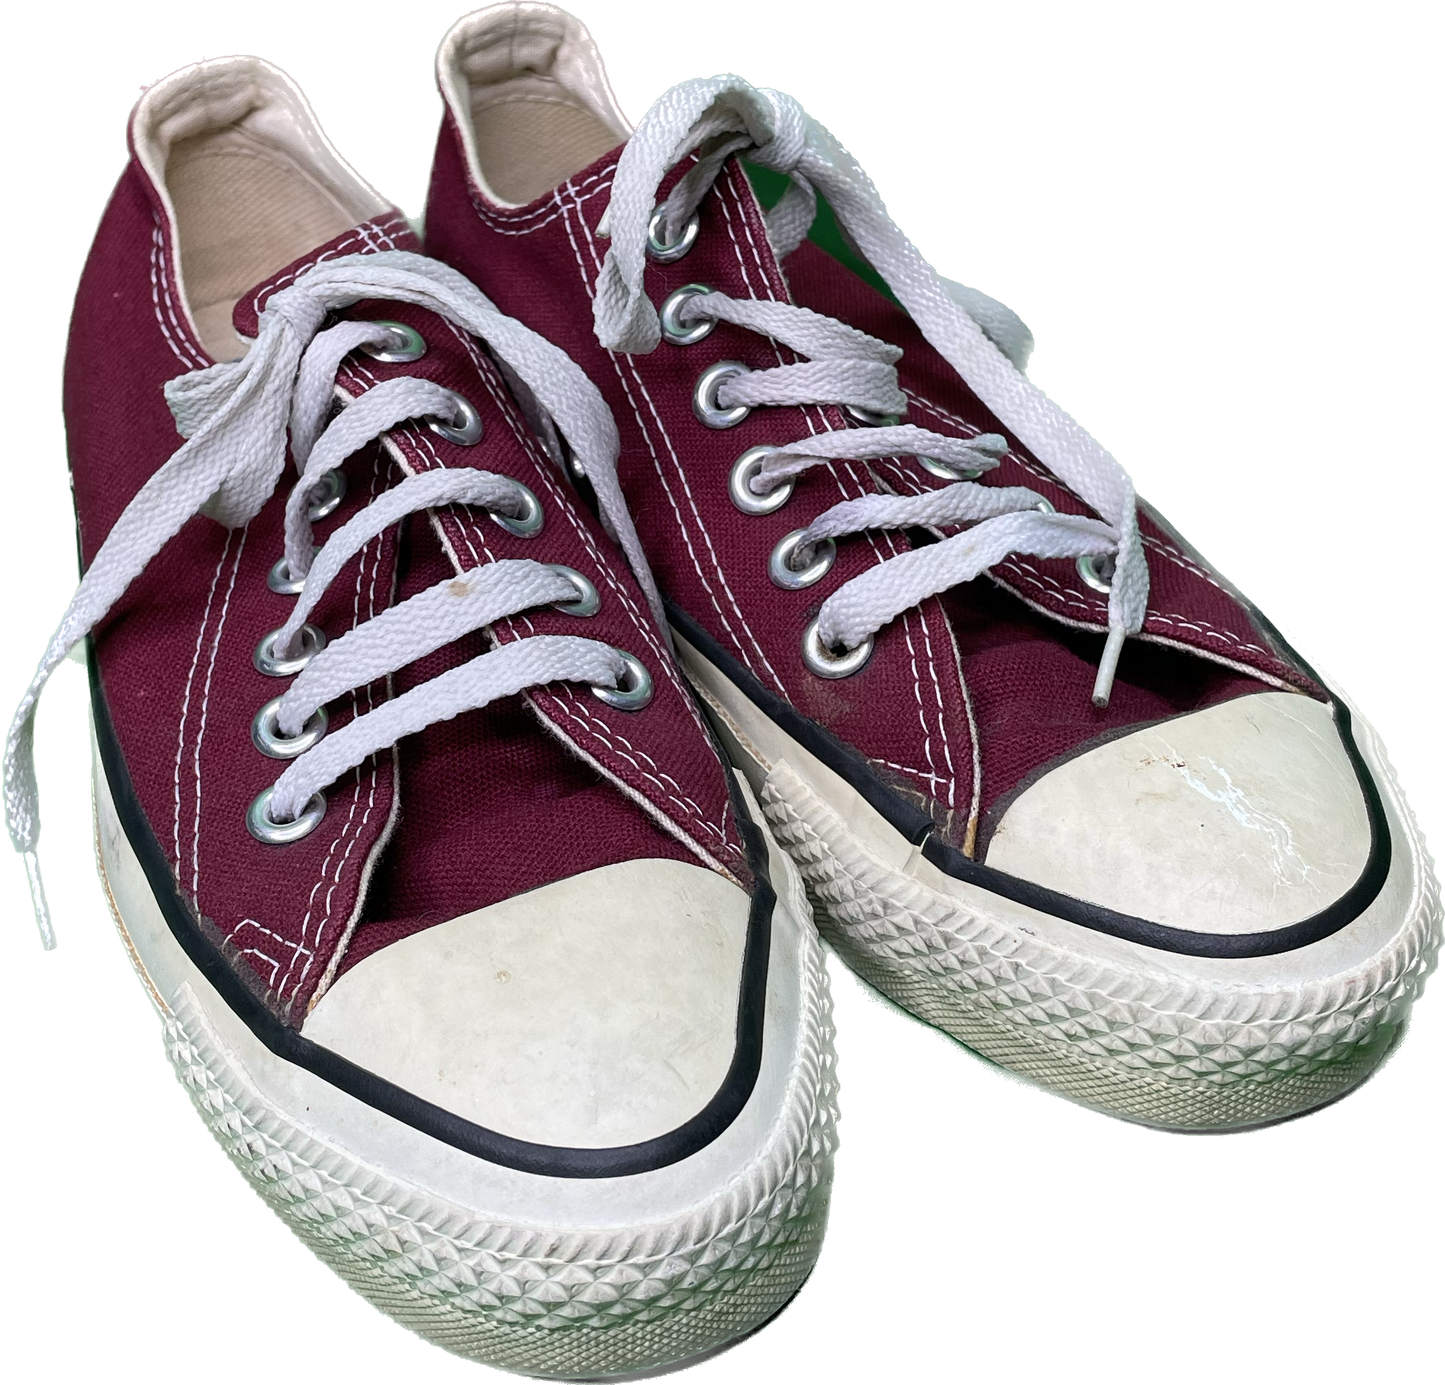 Vintage Sz 5 1/2 Converse Maroon USA Made Skate Surf Shoes 70s 80s